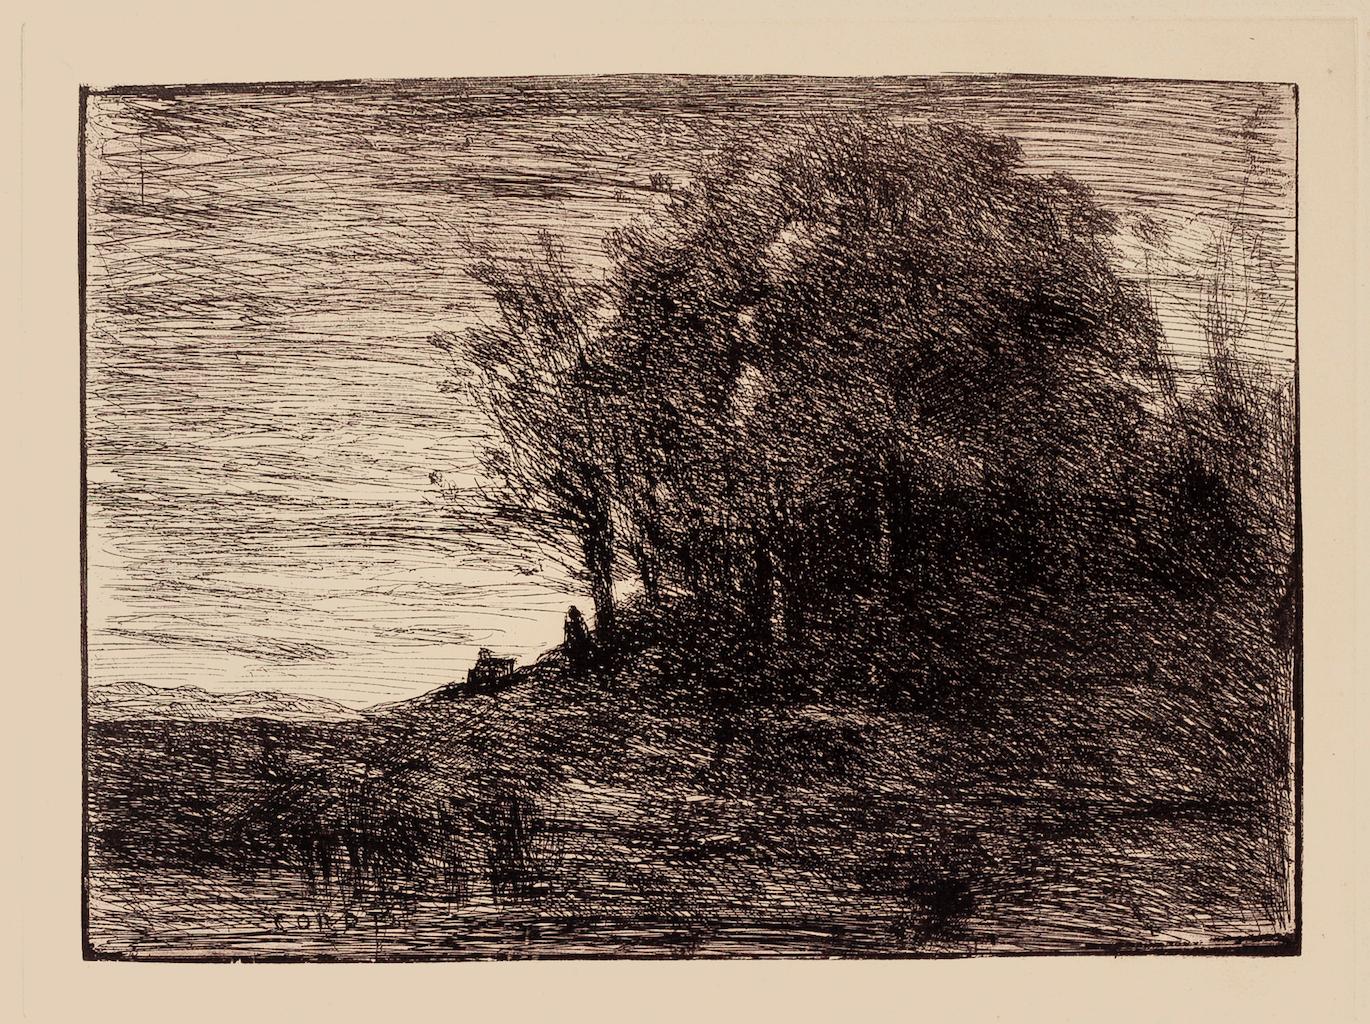 Jean-Baptiste-Camille Corot Landscape Print - Landscape - Original Etching on Paper by Camille Corot - 19th Century